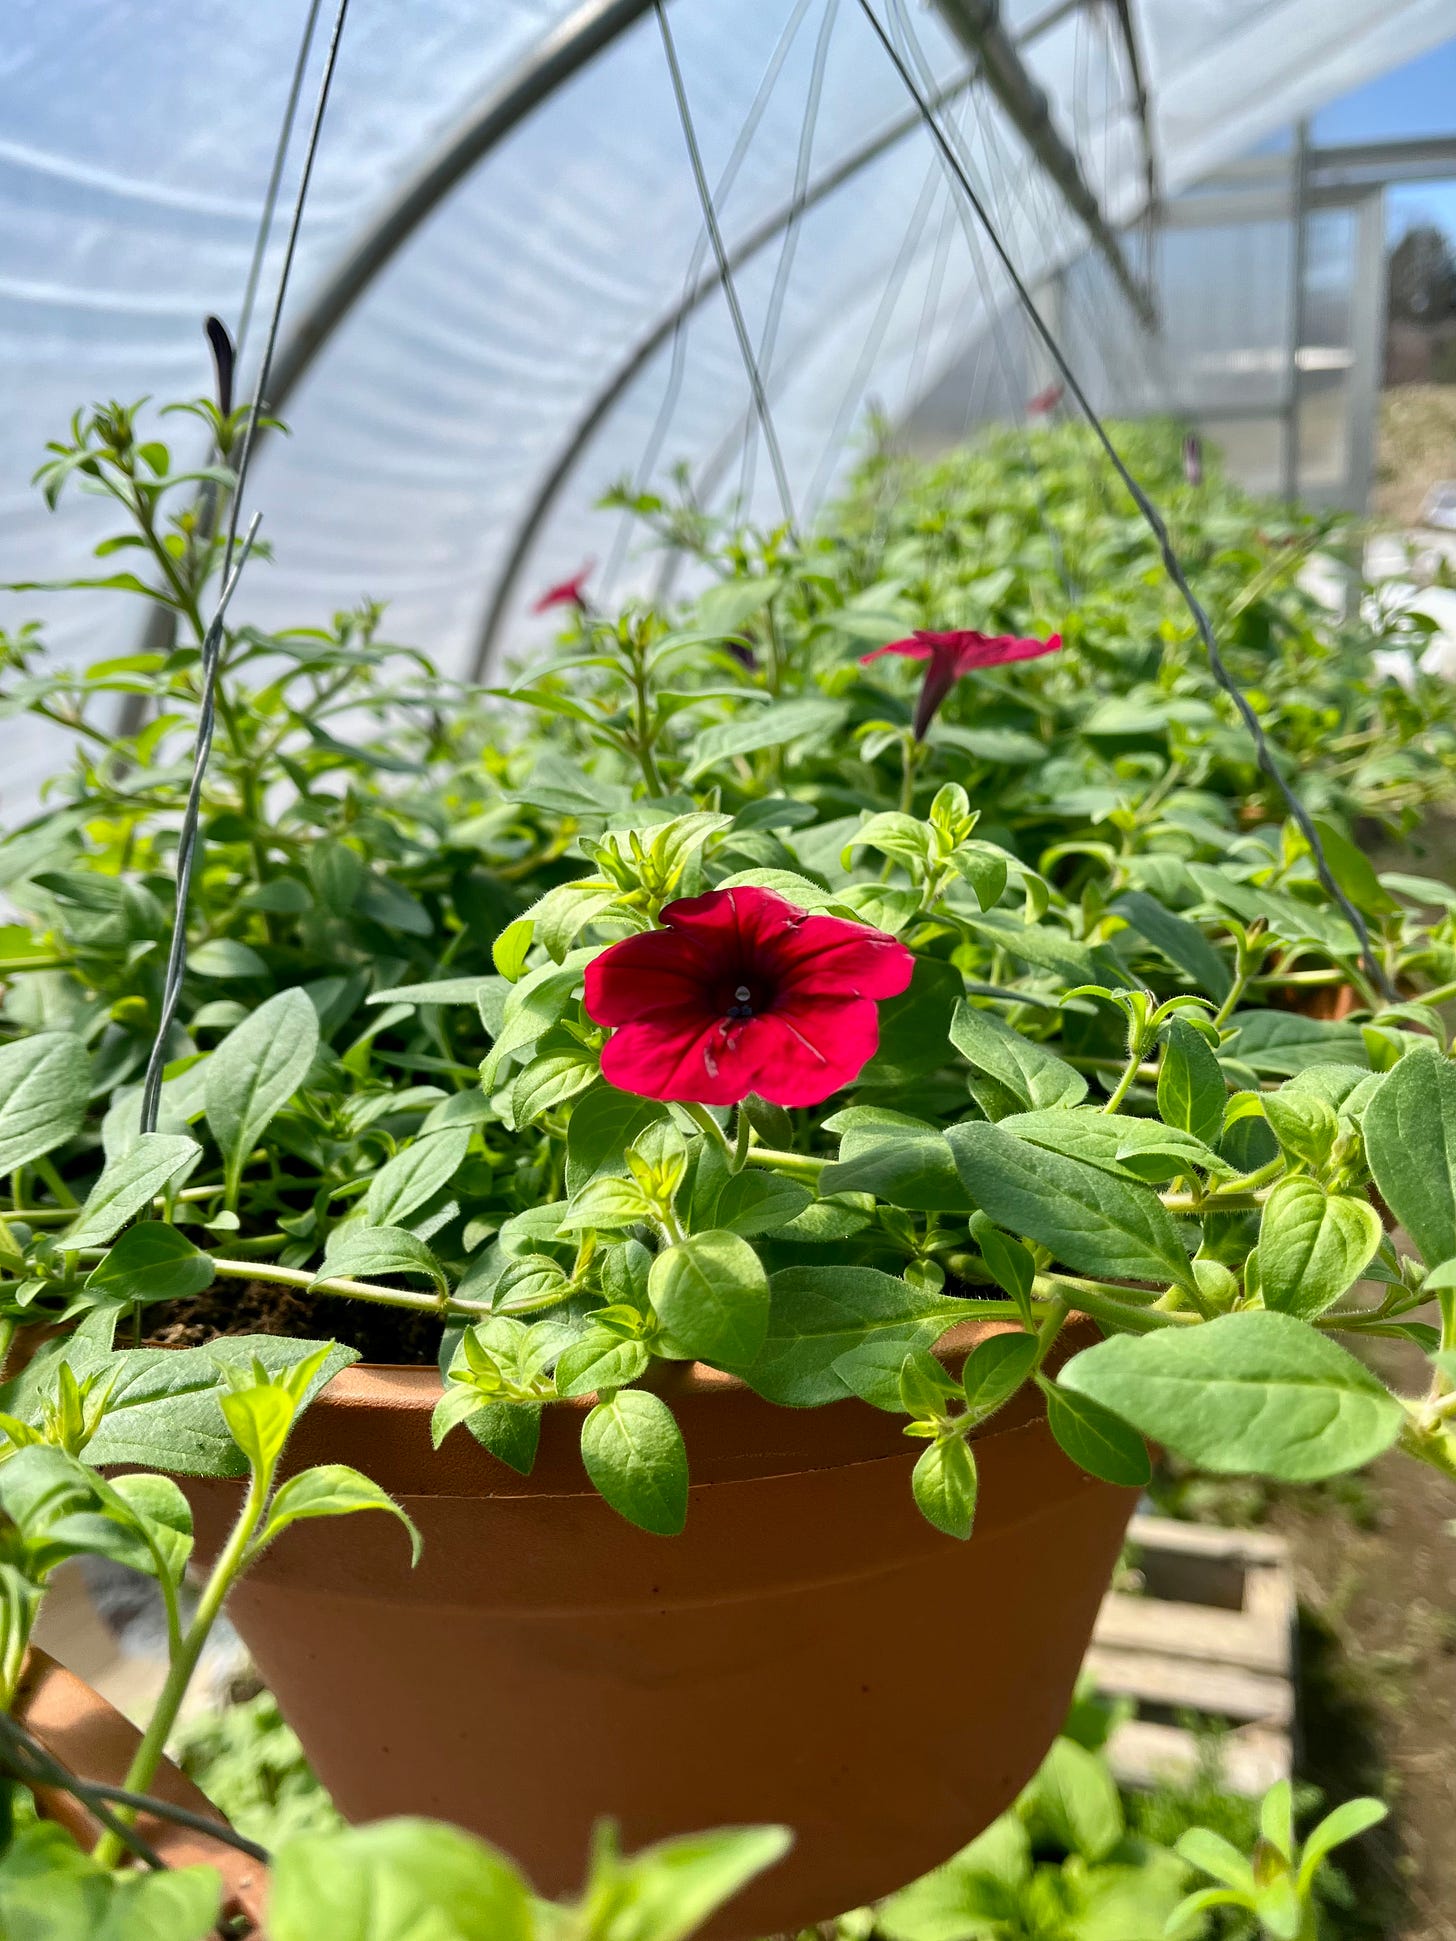 red petunias blooming in a hanging basket inside a greenhouse